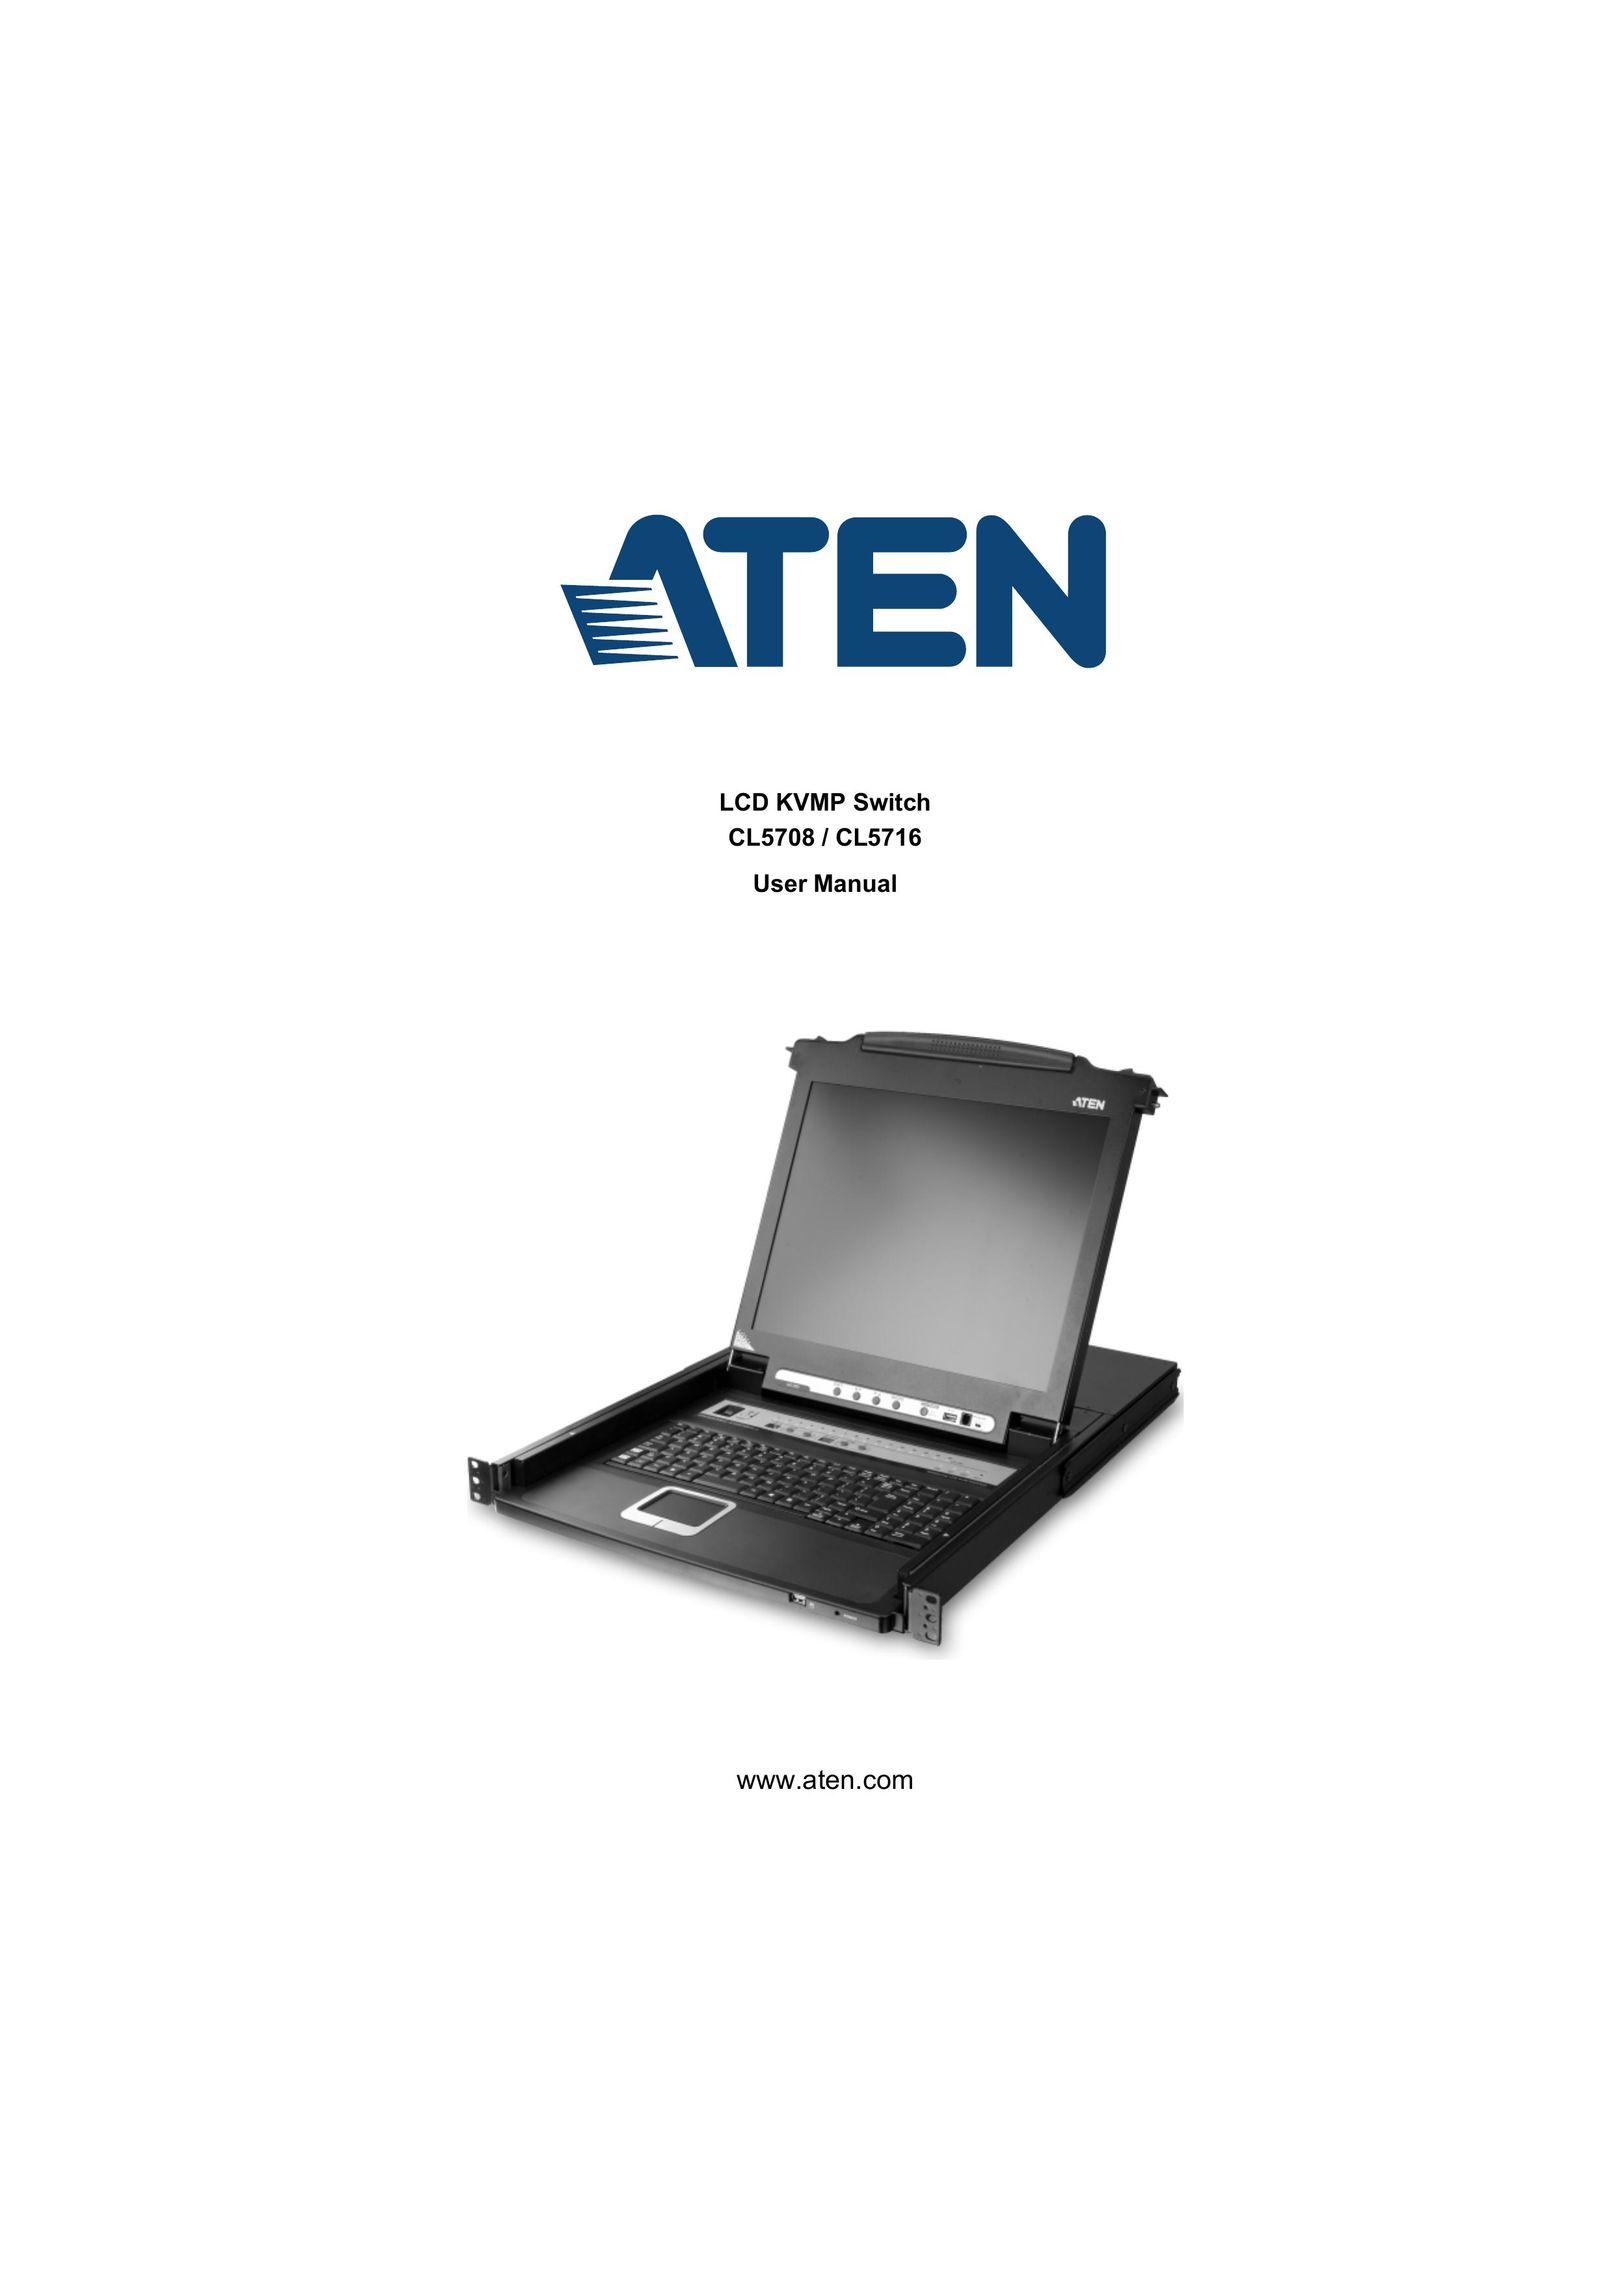 ATEN Technology CL5708 Projection Television User Manual